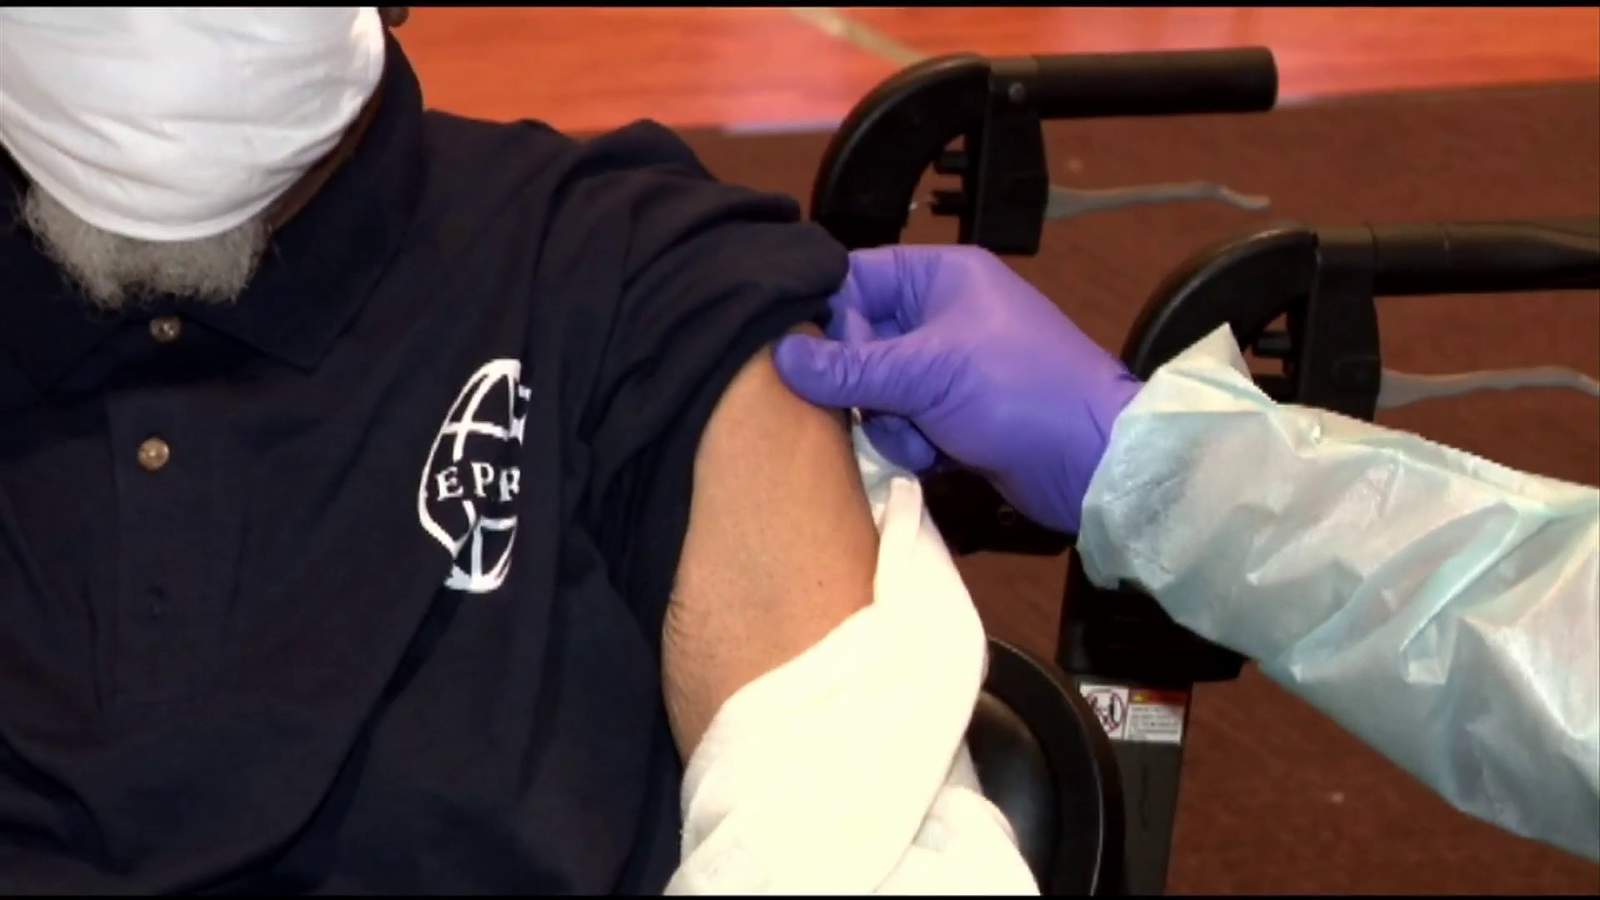 Doctors urge fully vaccinated people to continue practicing COVID-19 safety measures